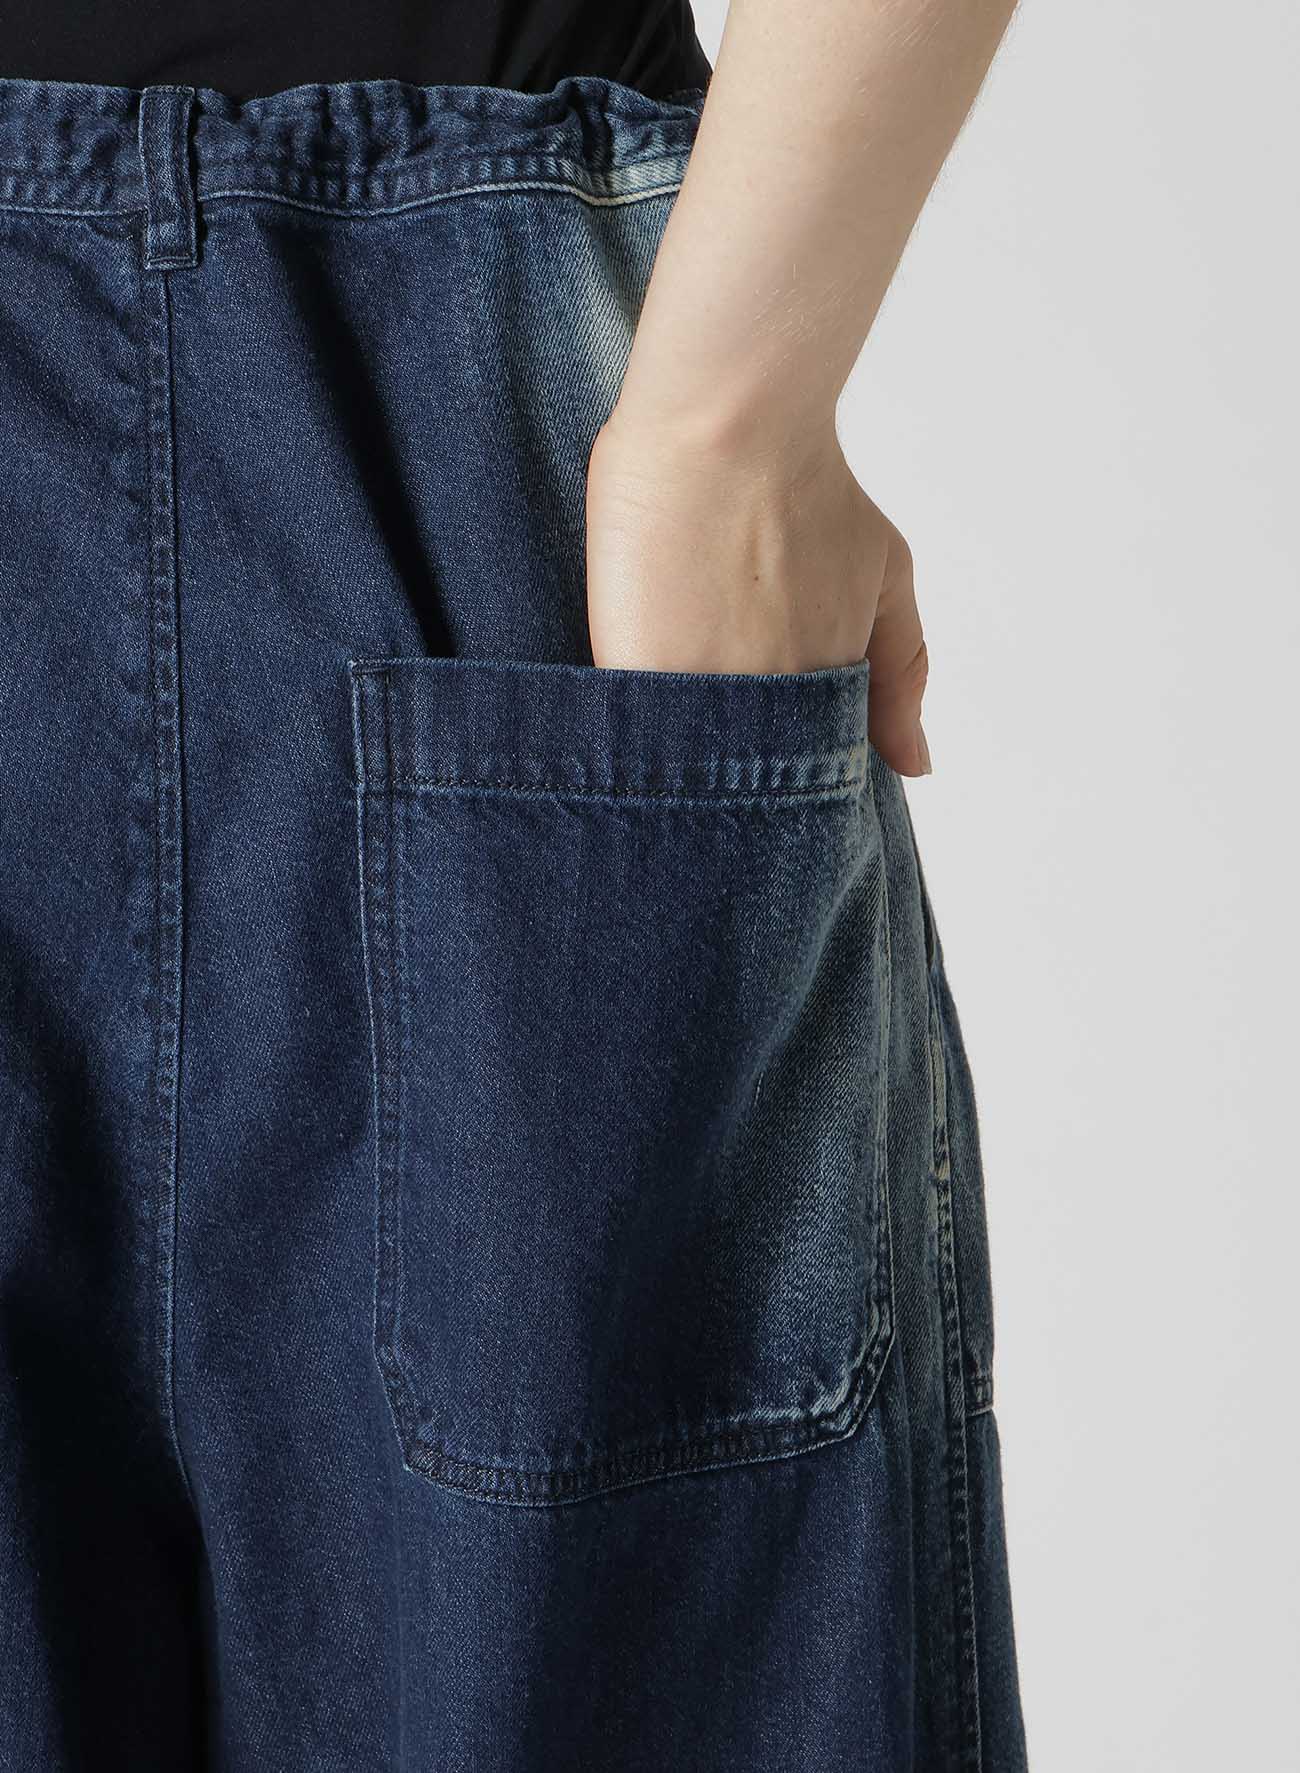 【8/2 12:00 Release】C/ SPOTTED DENIM LONG STRAIGHT PANTS